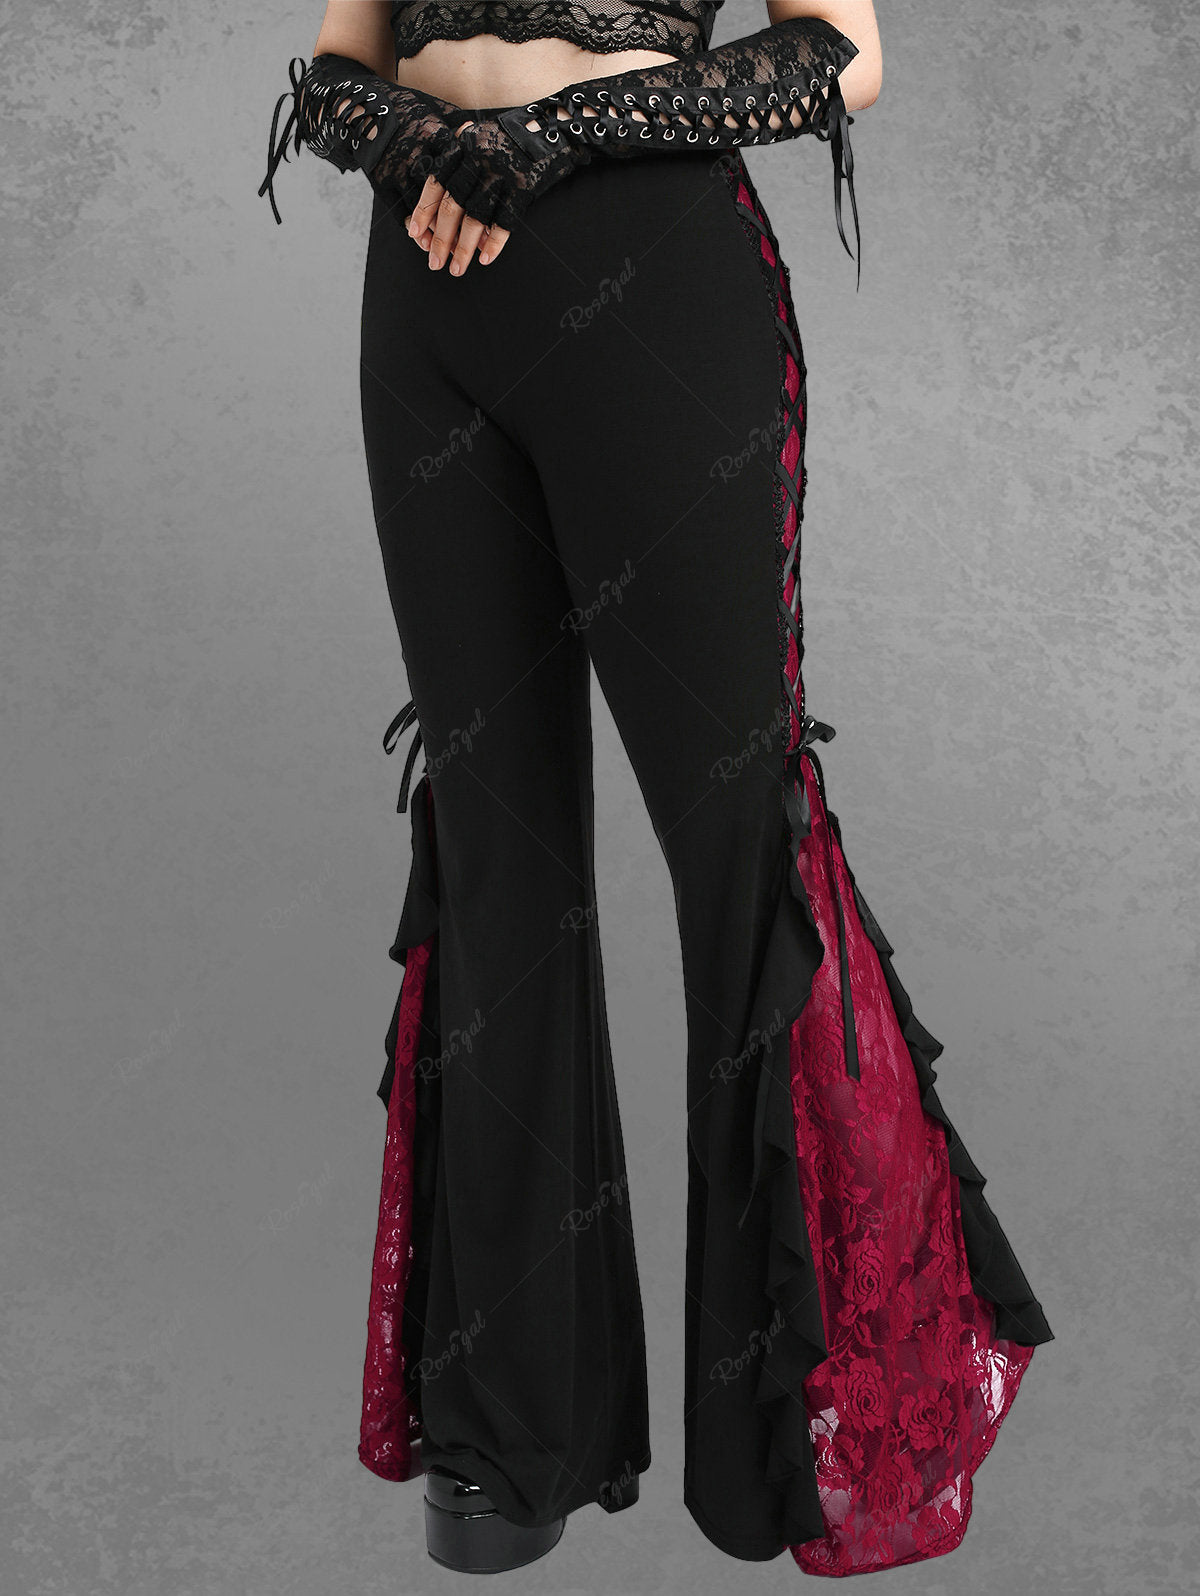 💗Lauren Loves💗Victorian Goth Rose Lace Panel Ruffle Lace-up Flare Pants